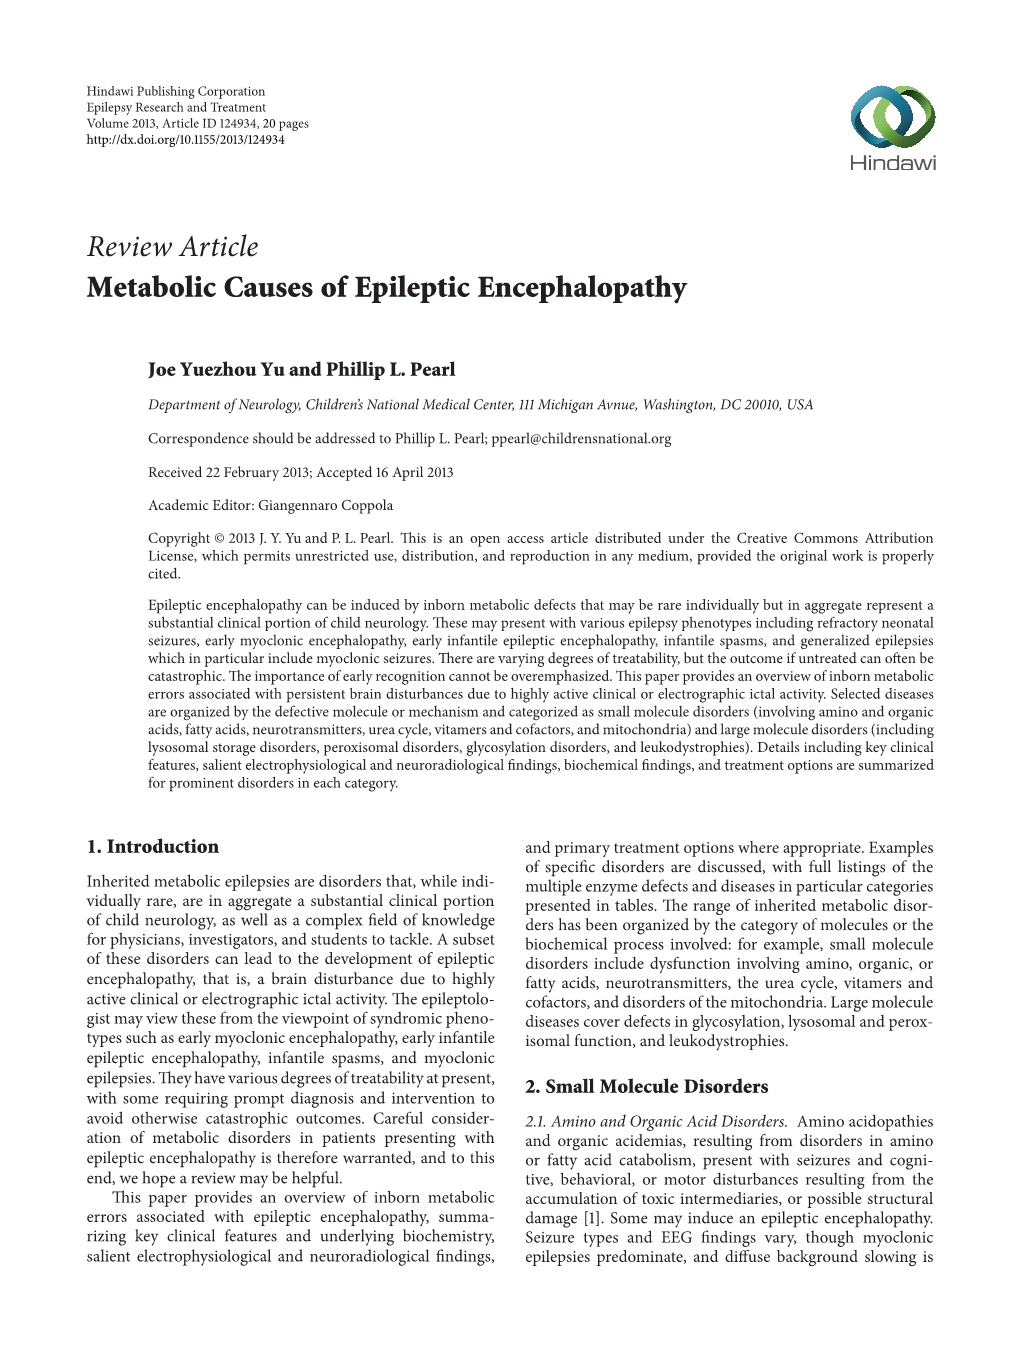 Review Article Metabolic Causes of Epileptic Encephalopathy